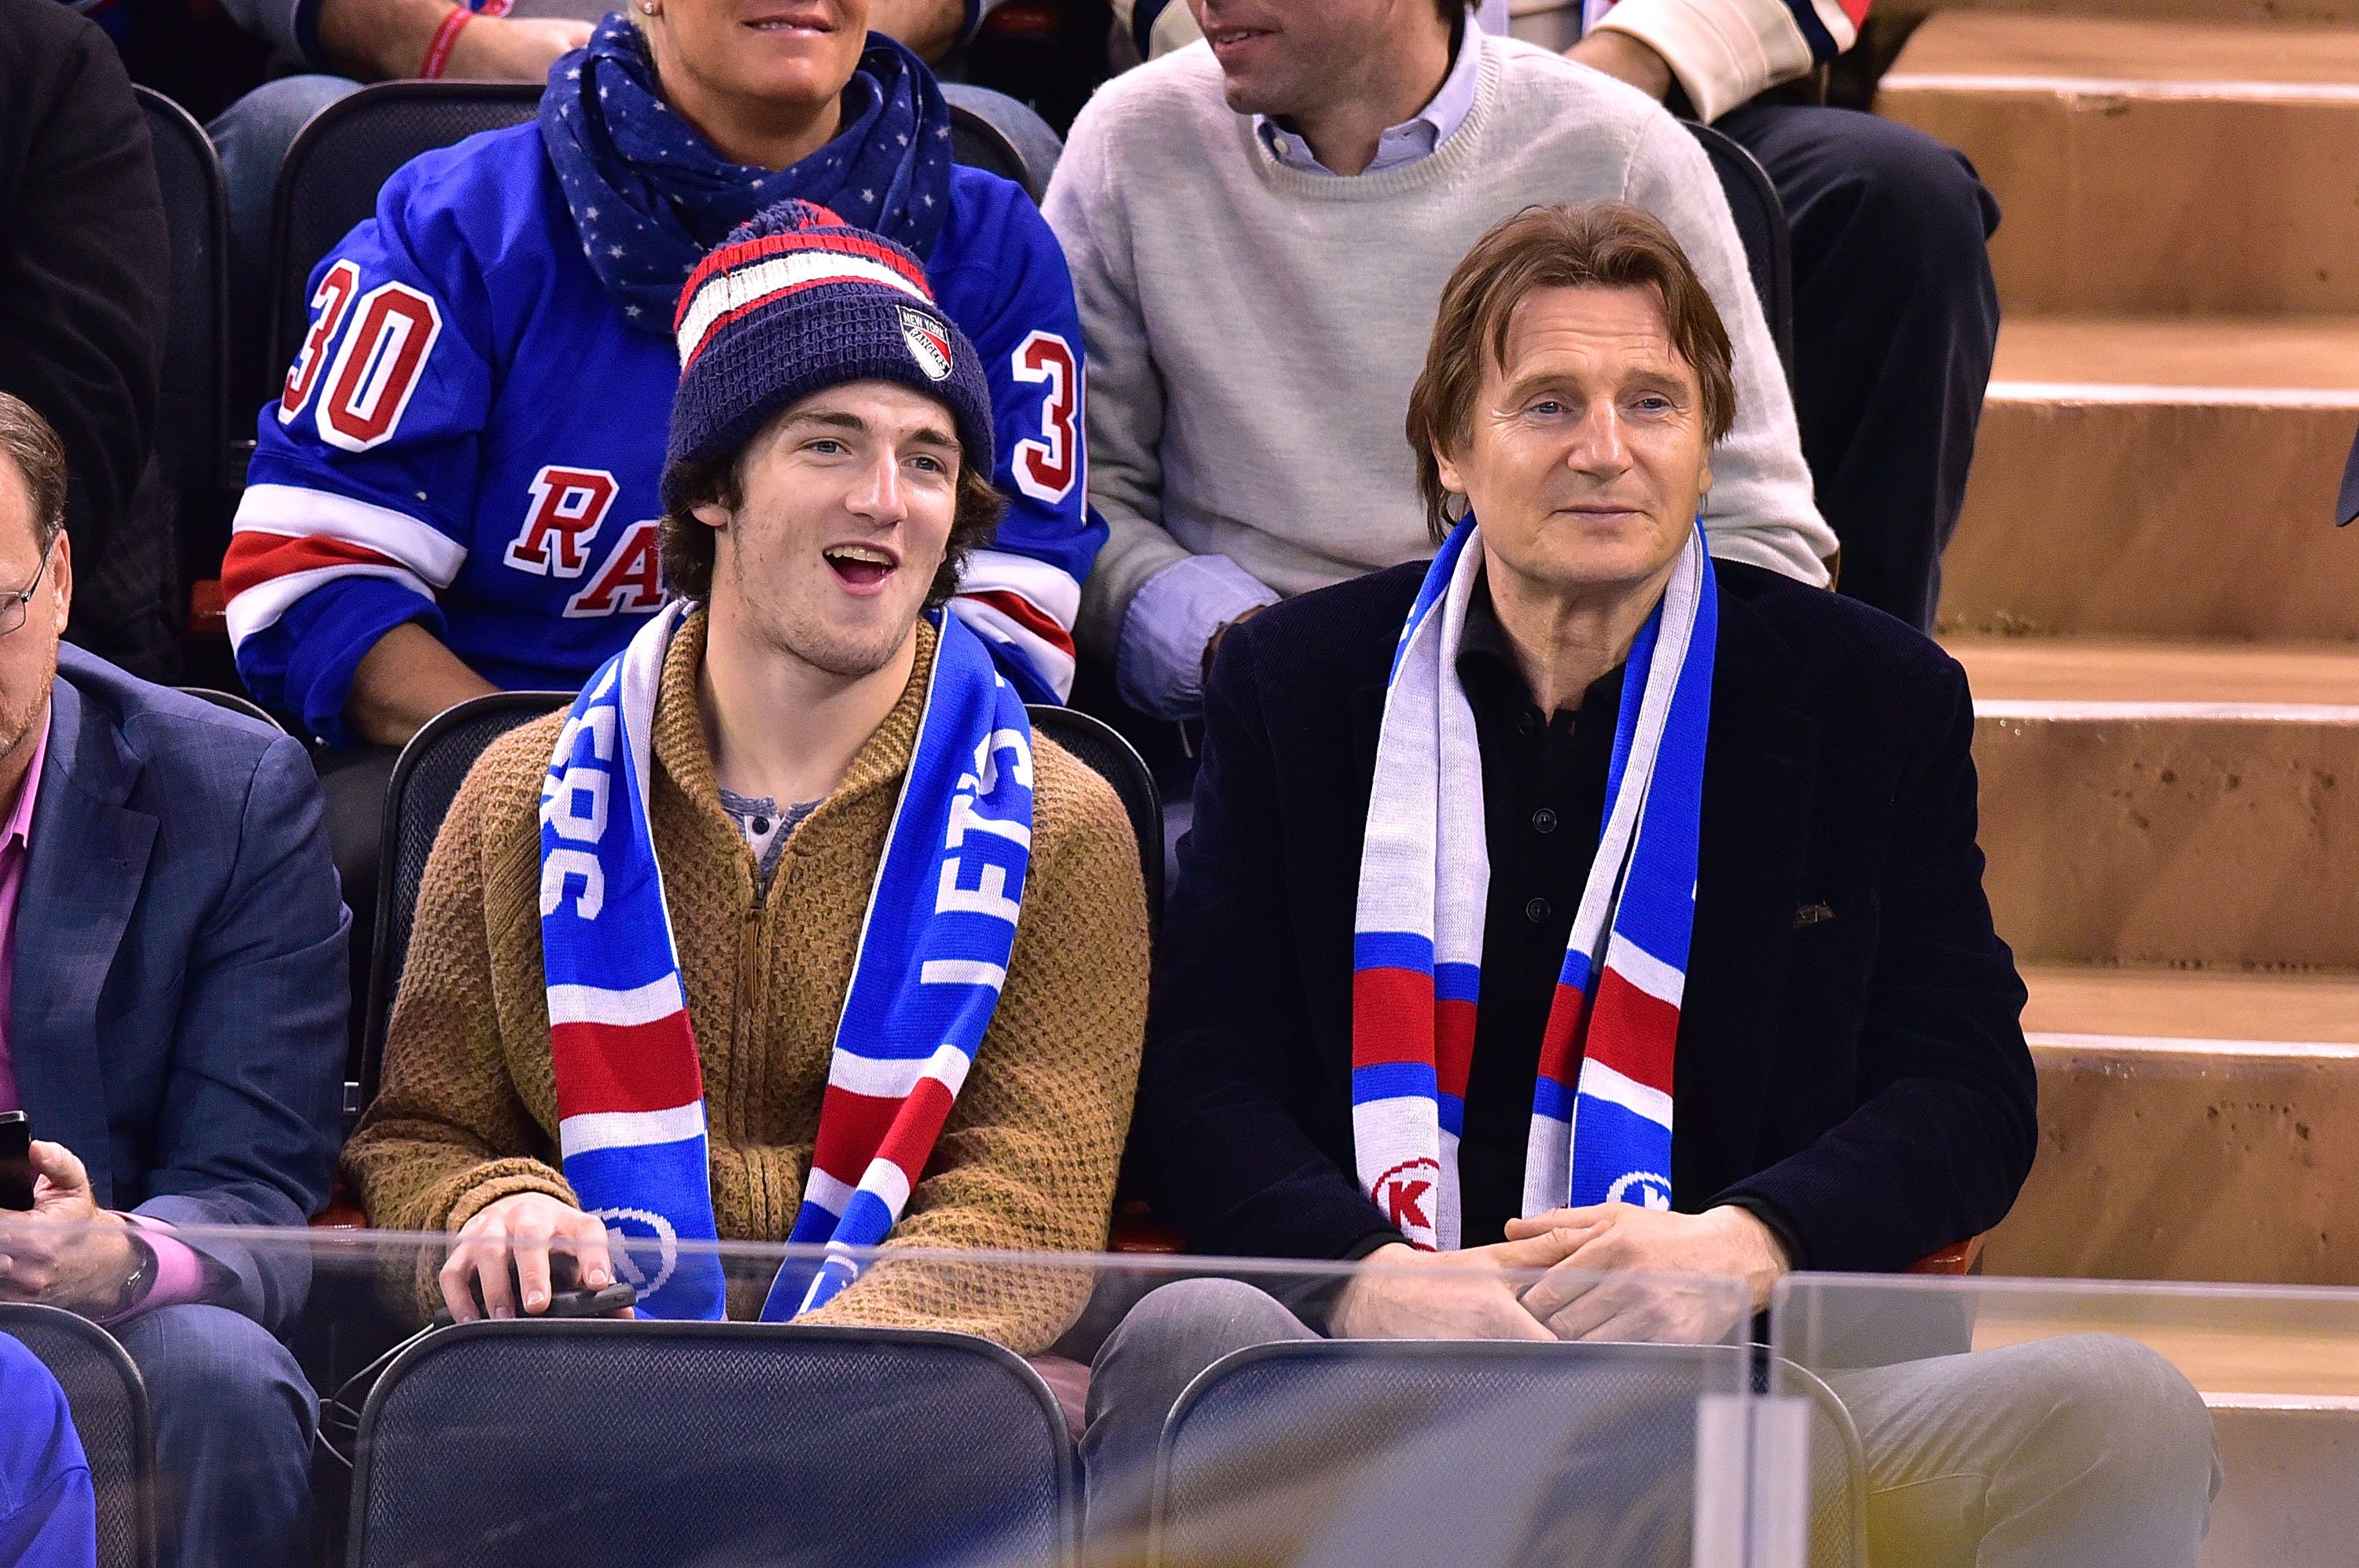 Liam Neeson and his son Daniel in New York 2014. | Source: Getty Images